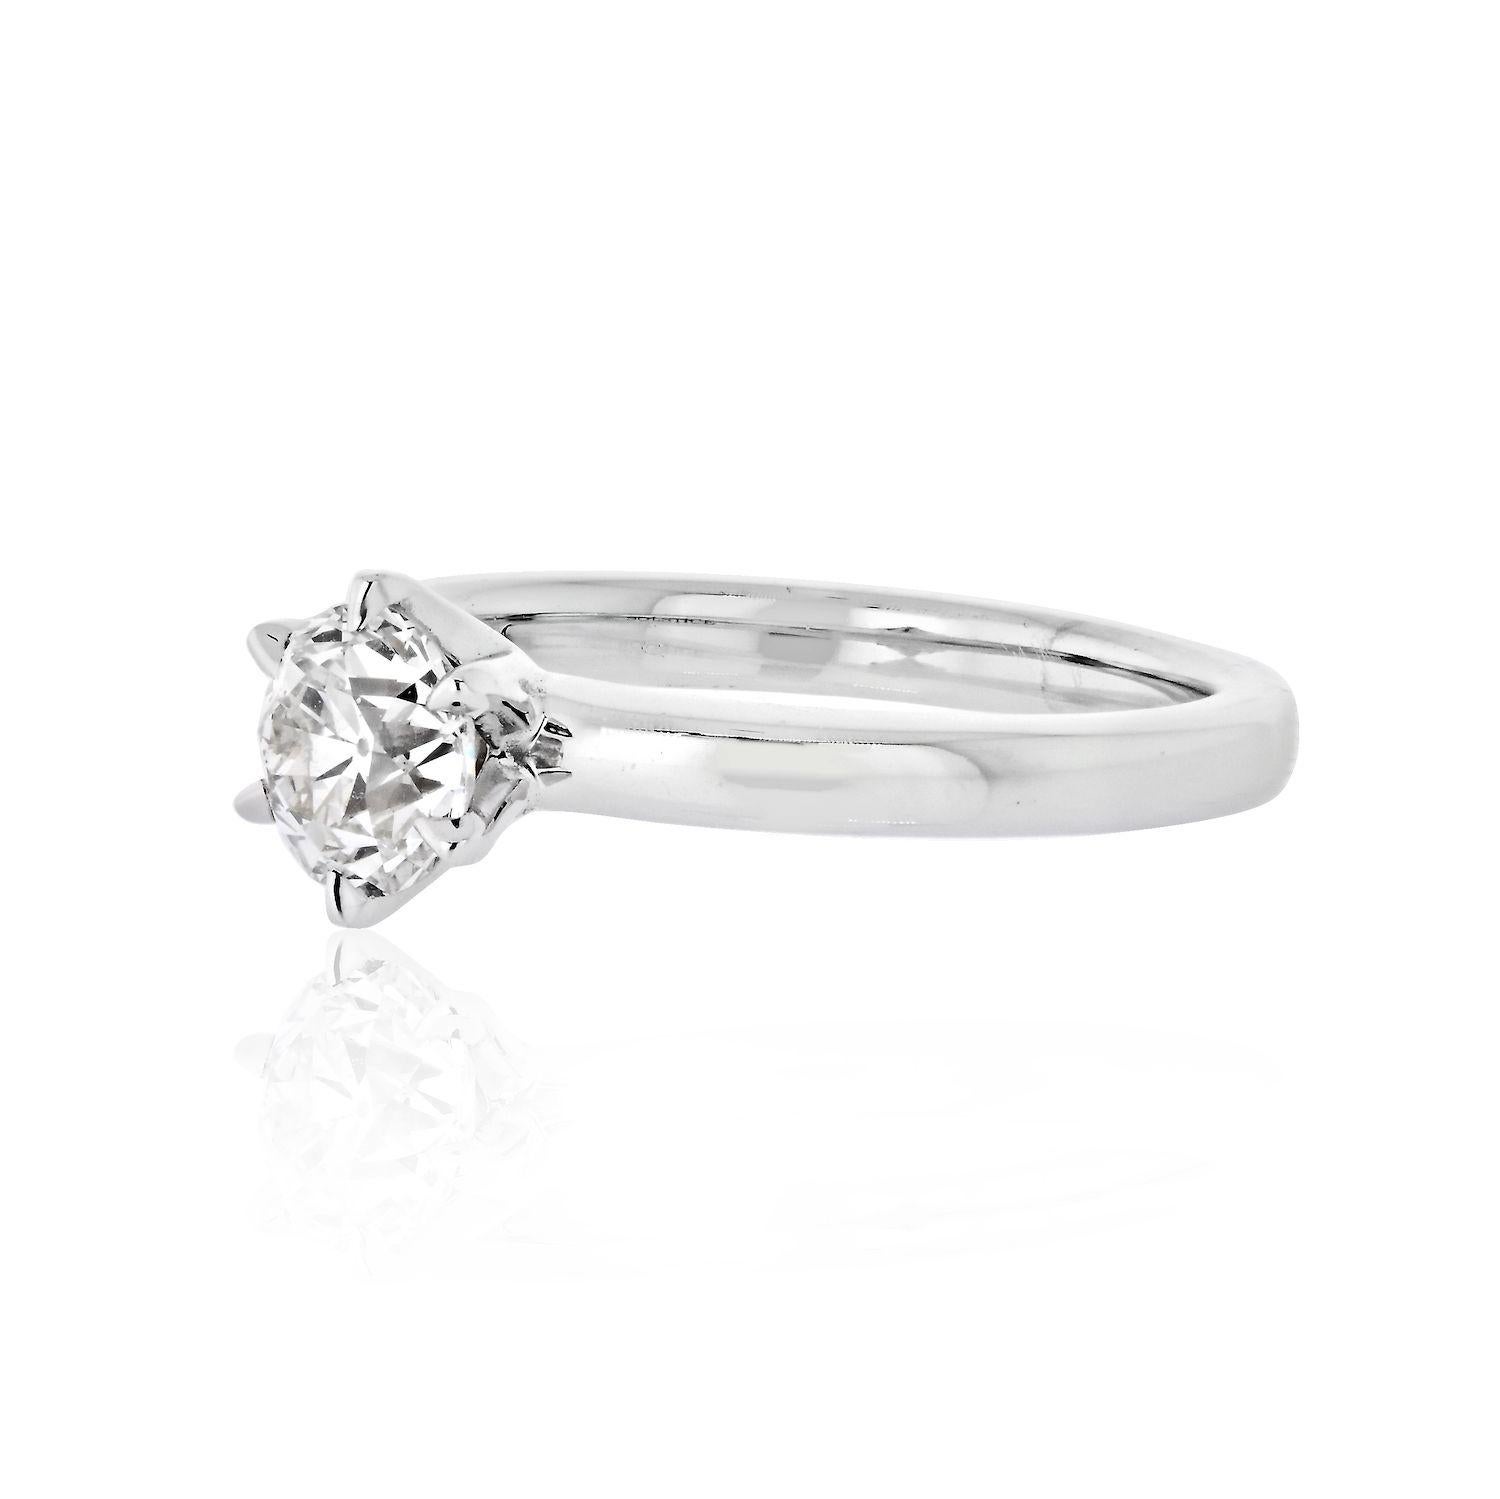 This solitaire style engagement ring is the perfect marriage of modern and vintage. It features a 1.01 carat Old European Cut diamond in a modern 14 karat, 2.5mm wide white gold setting. The diamond, has I color and VS2 clarity certified by GIA and